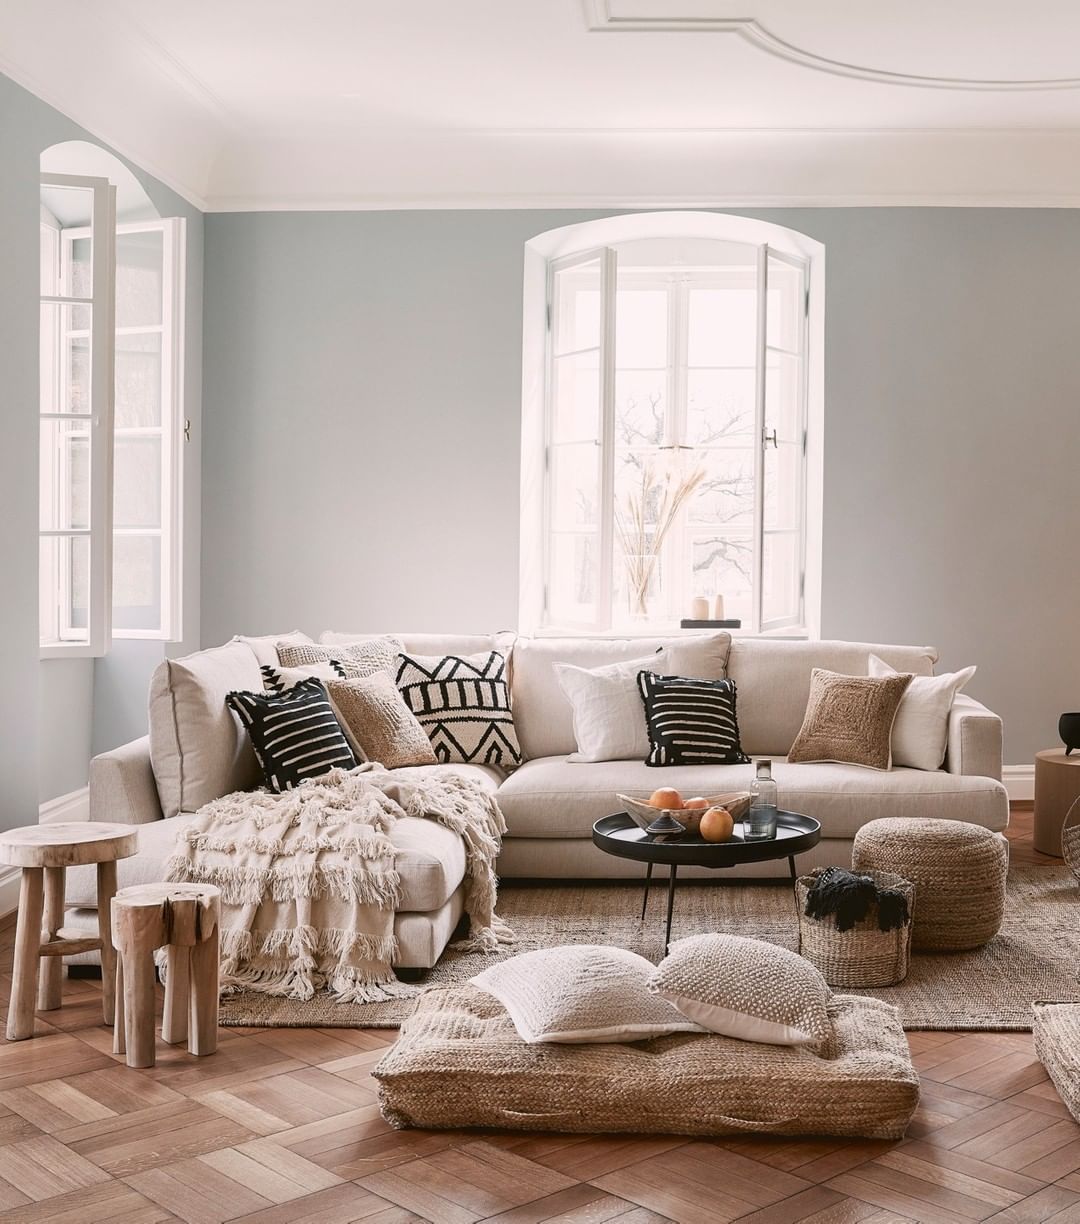 Gray living room with wood floors and white couch. Photo by Instagram user @westwingde